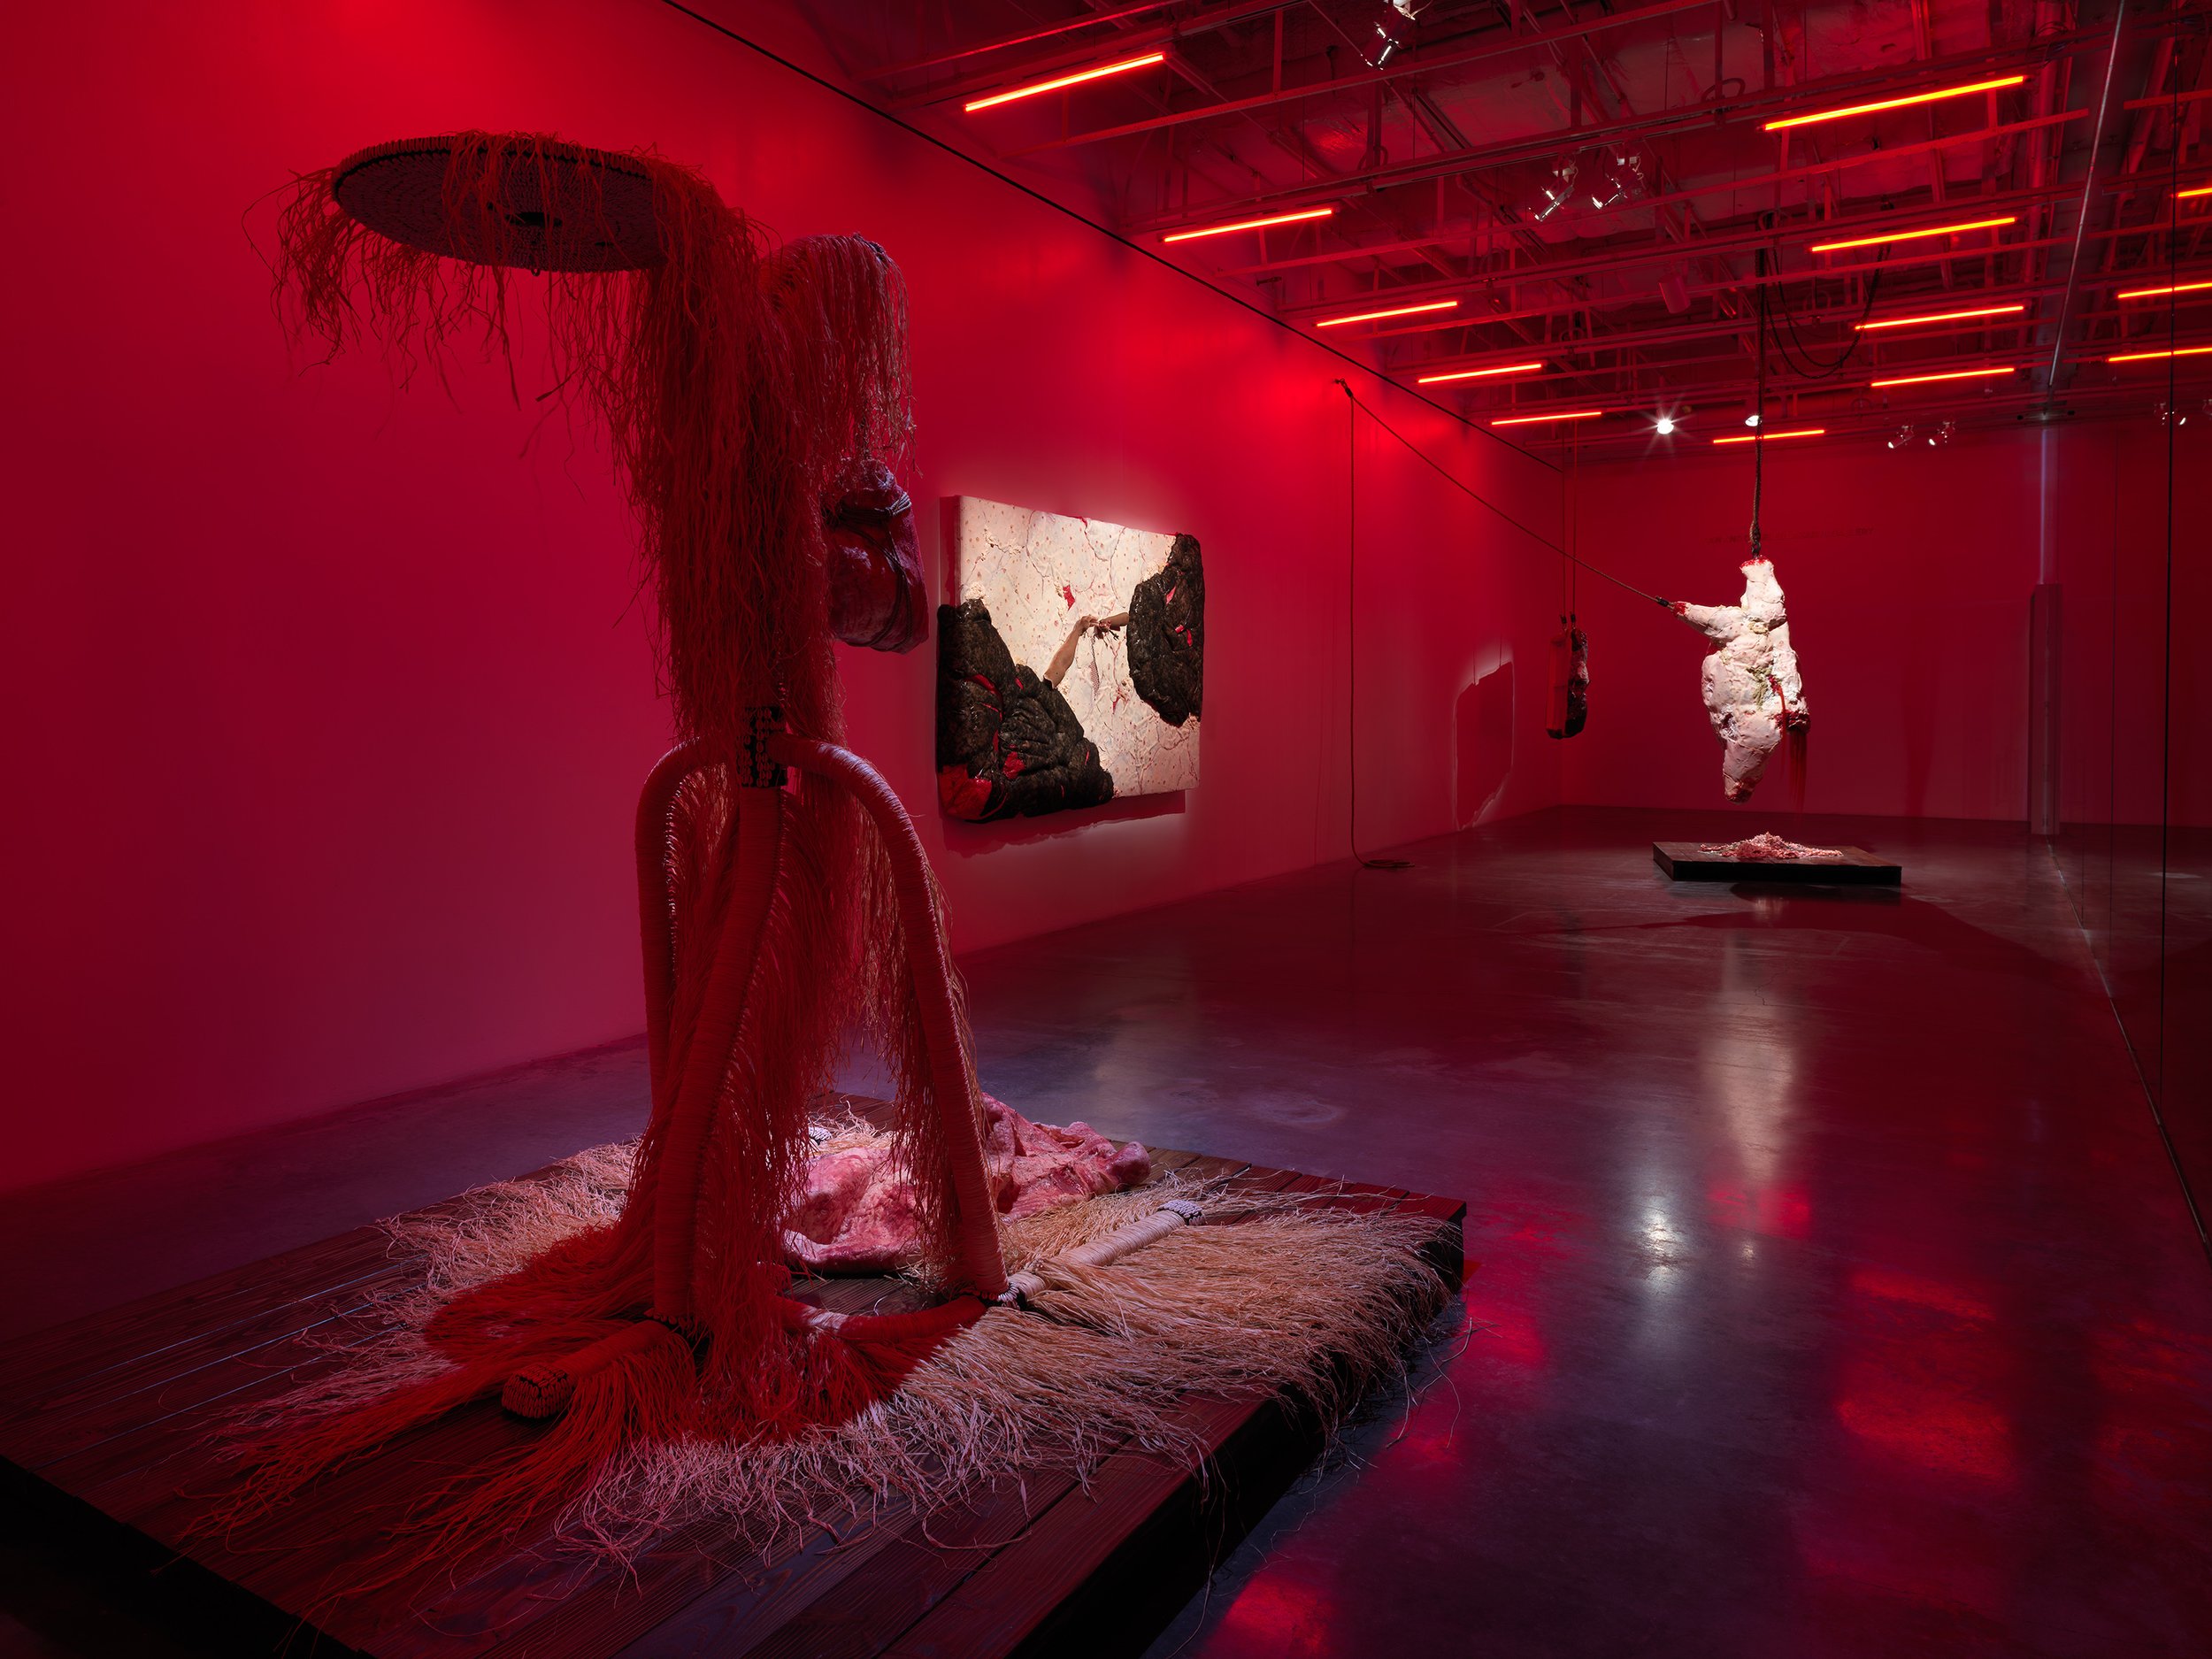 INSTALLATION VIEW, REVOLTED, NEW MUSEUM, NEW YORK